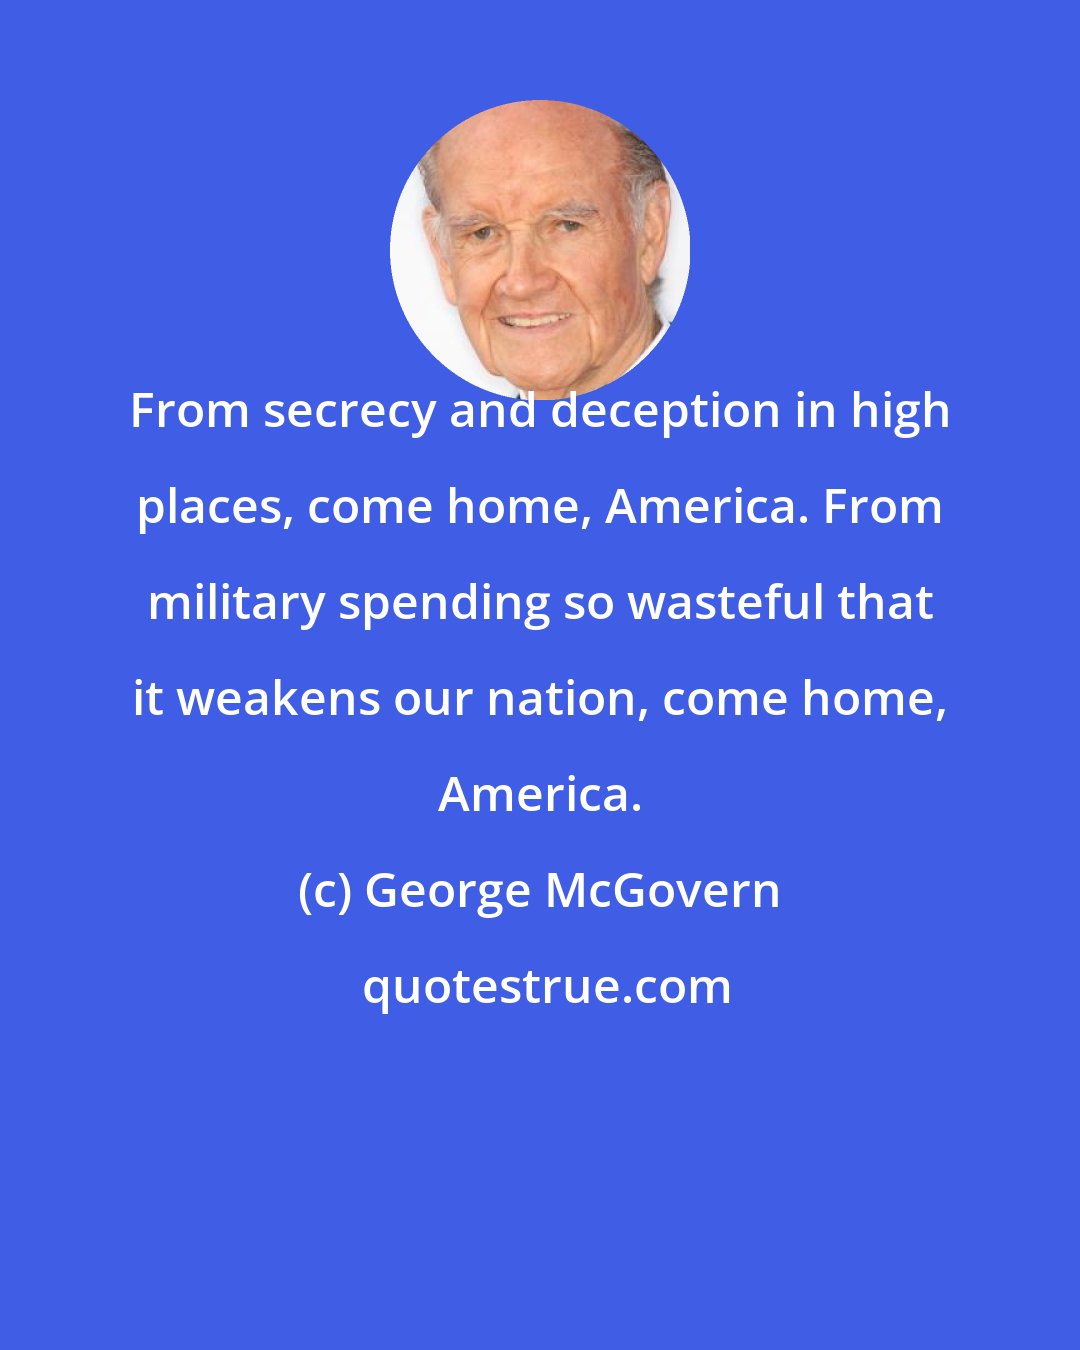 George McGovern: From secrecy and deception in high places, come home, America. From military spending so wasteful that it weakens our nation, come home, America.